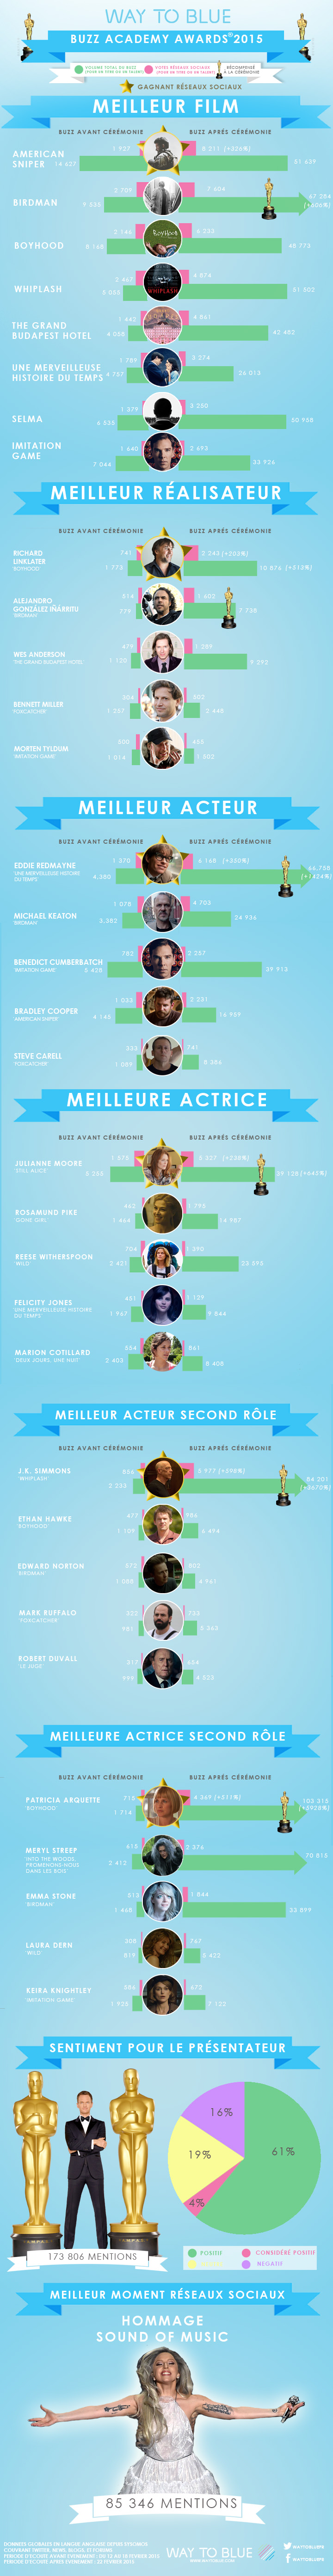 INFOGRAPHIC_ACADEMY_AWARDS_2015_HD